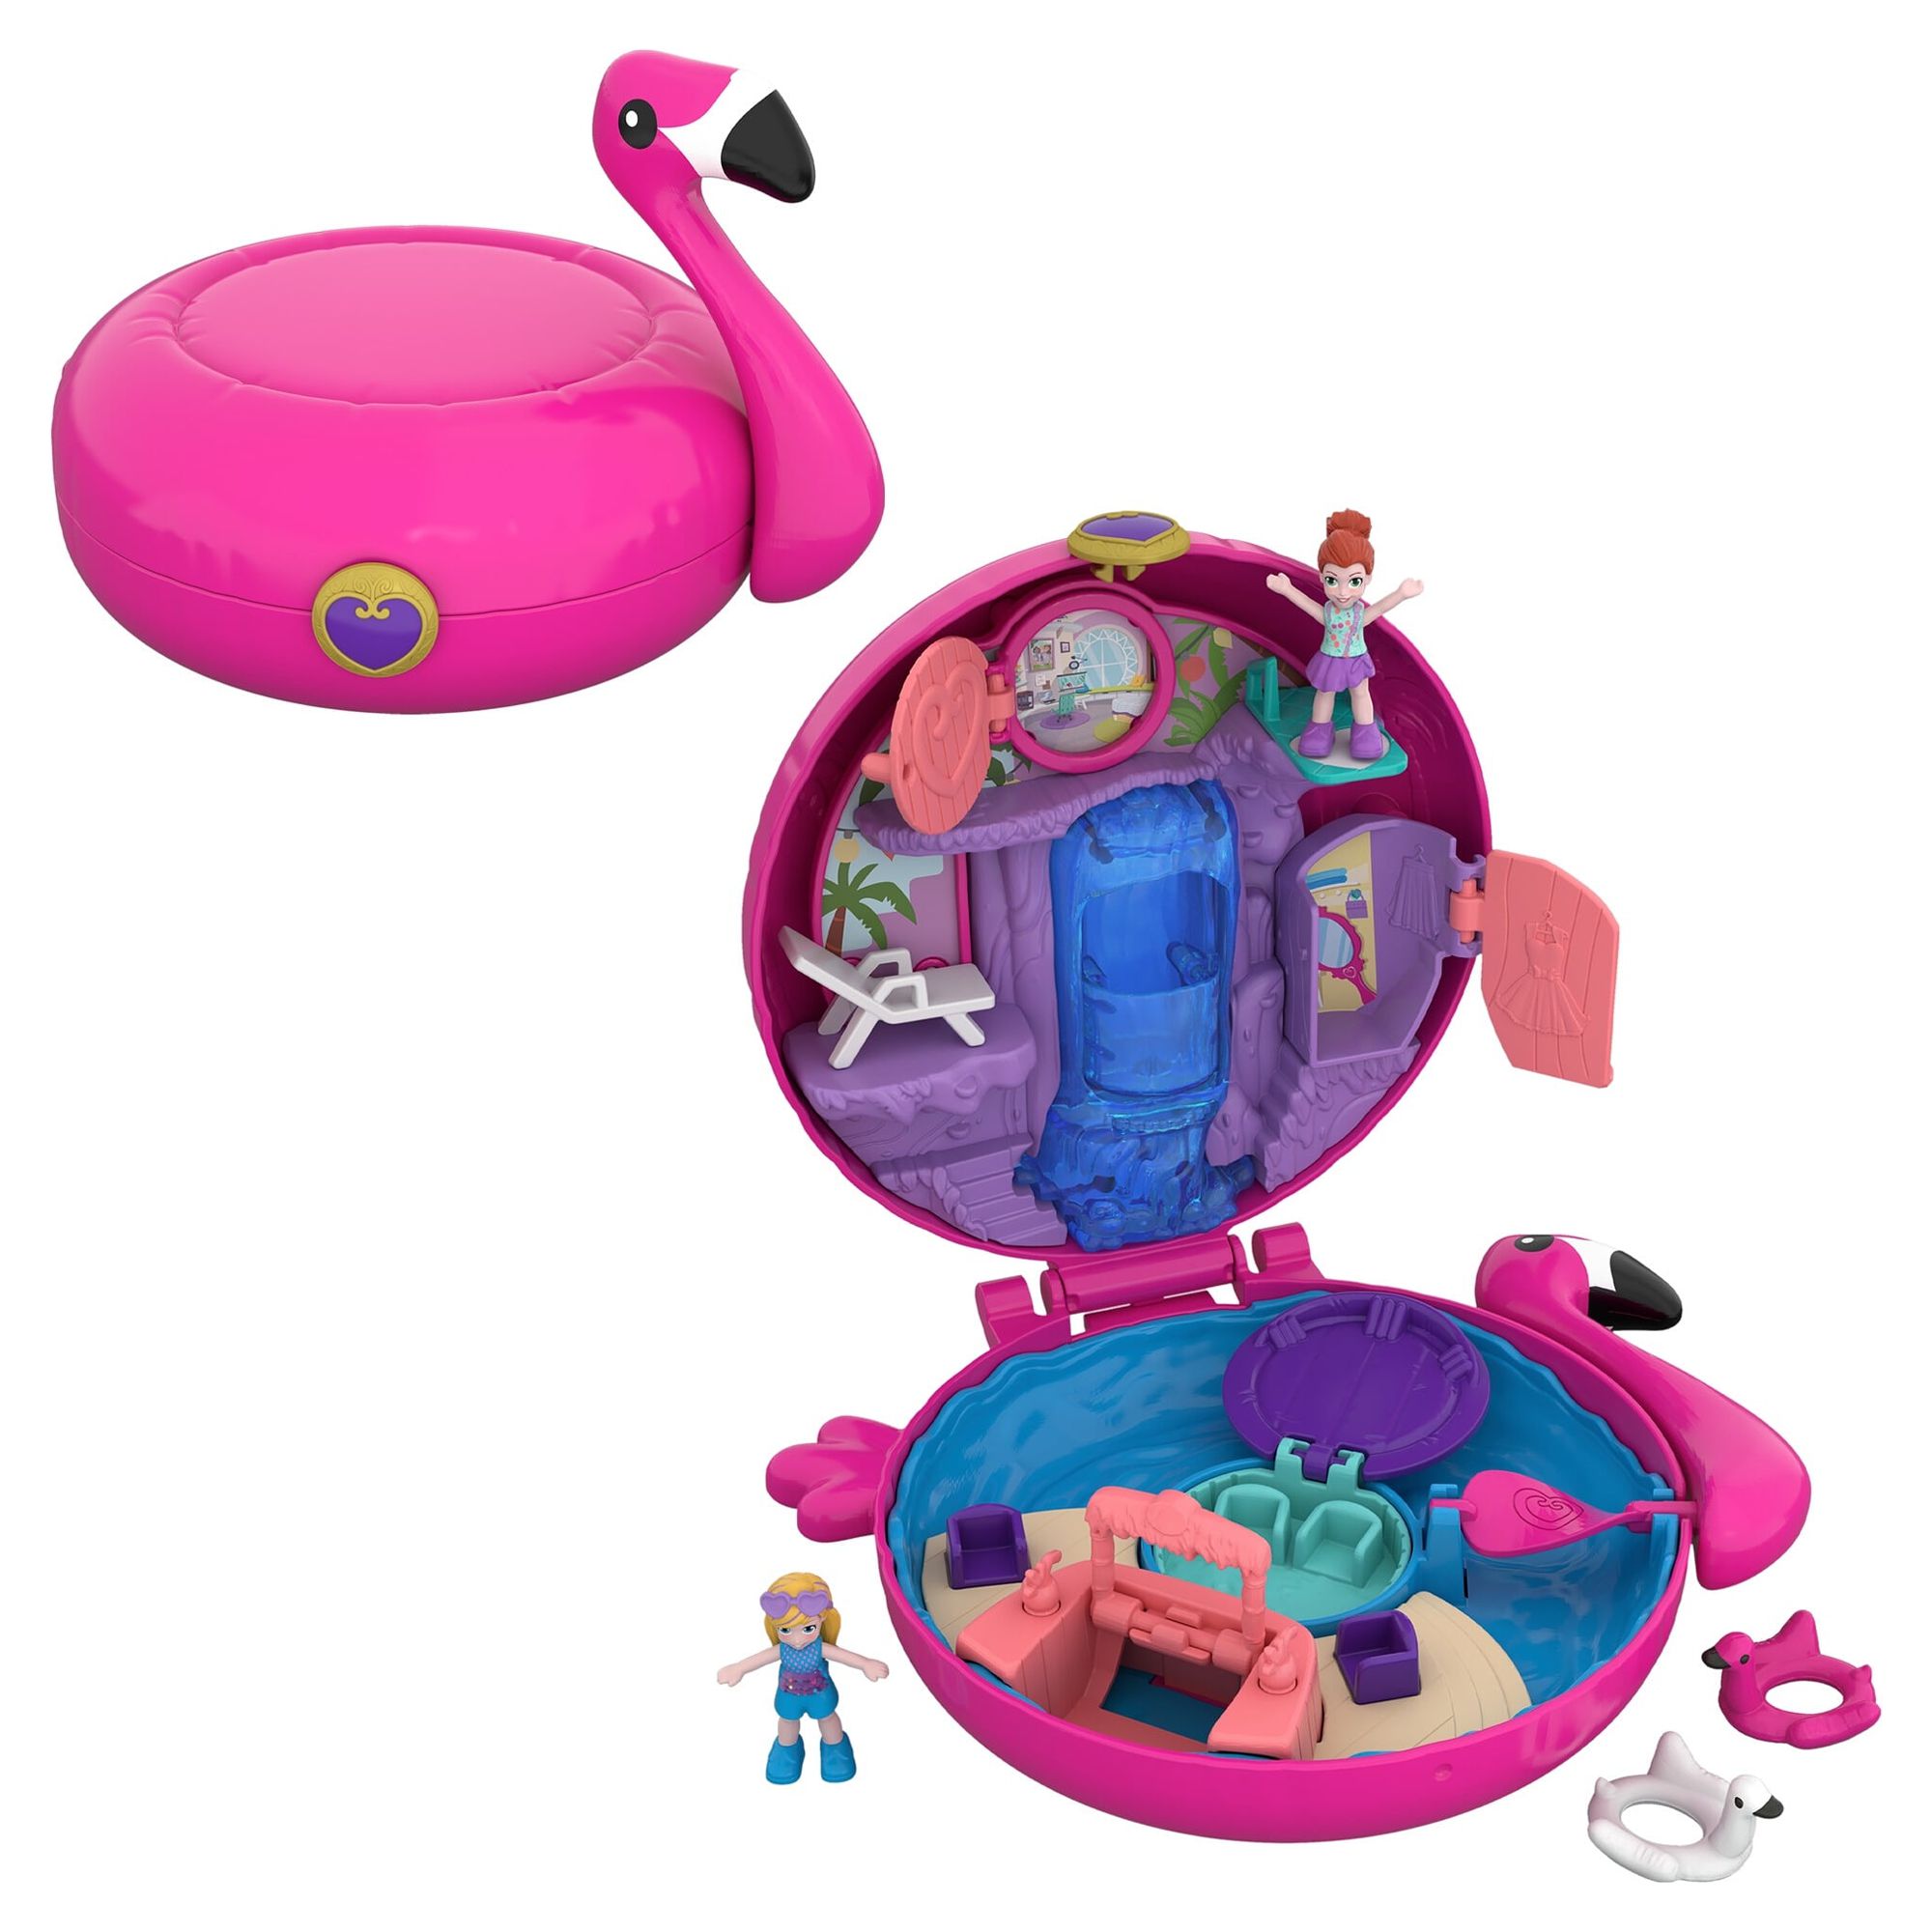 Polly Pocket Mini Toys, Compact Playset and 2 Dolls, Flamingo Floatie - image 1 of 8